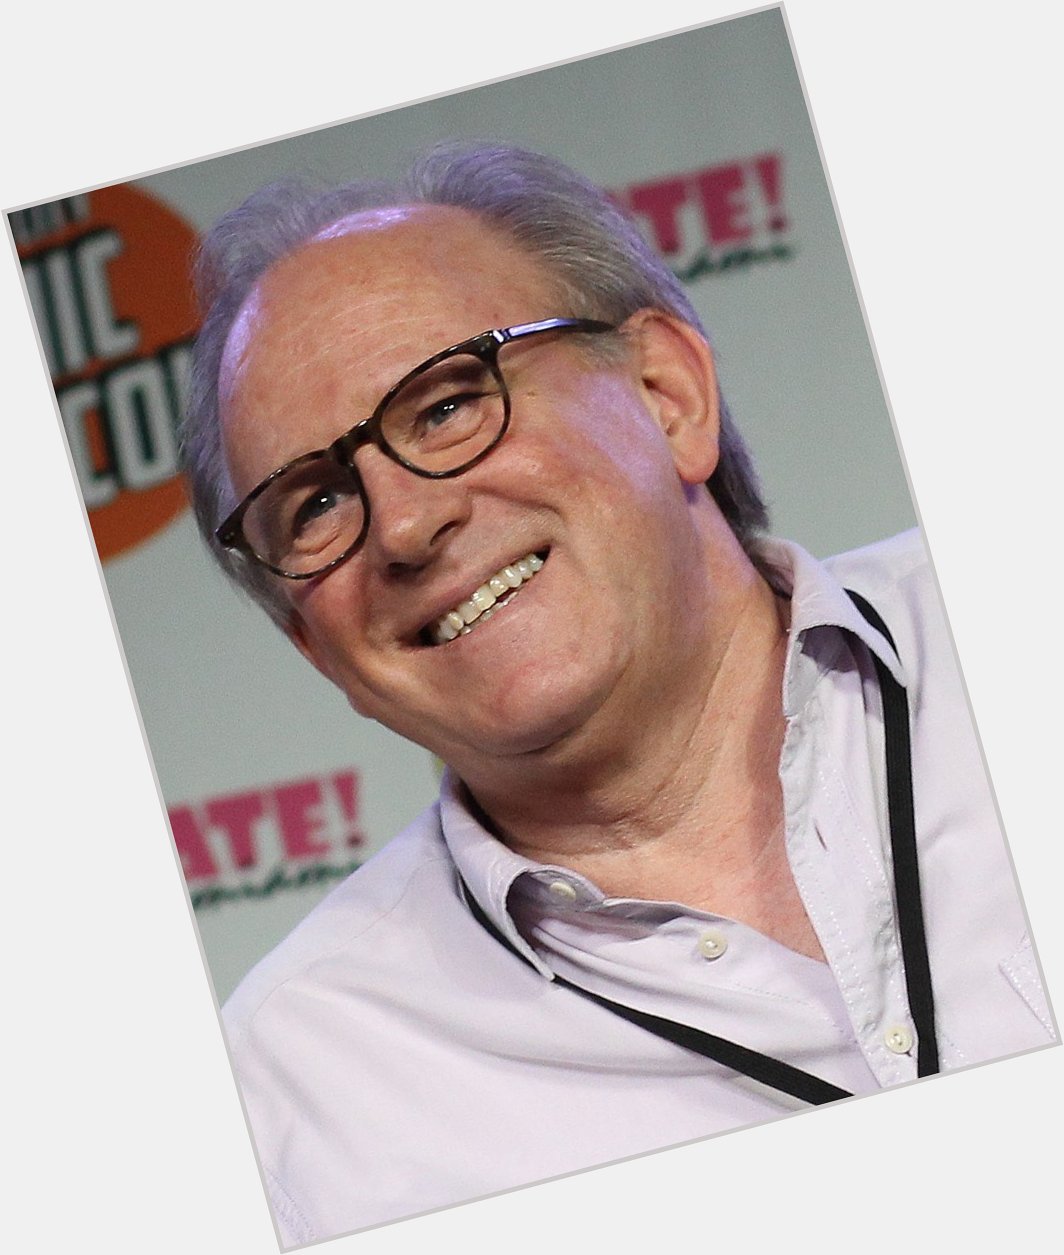 Happy birthday Peter Davison you re so lovely and I luv you      